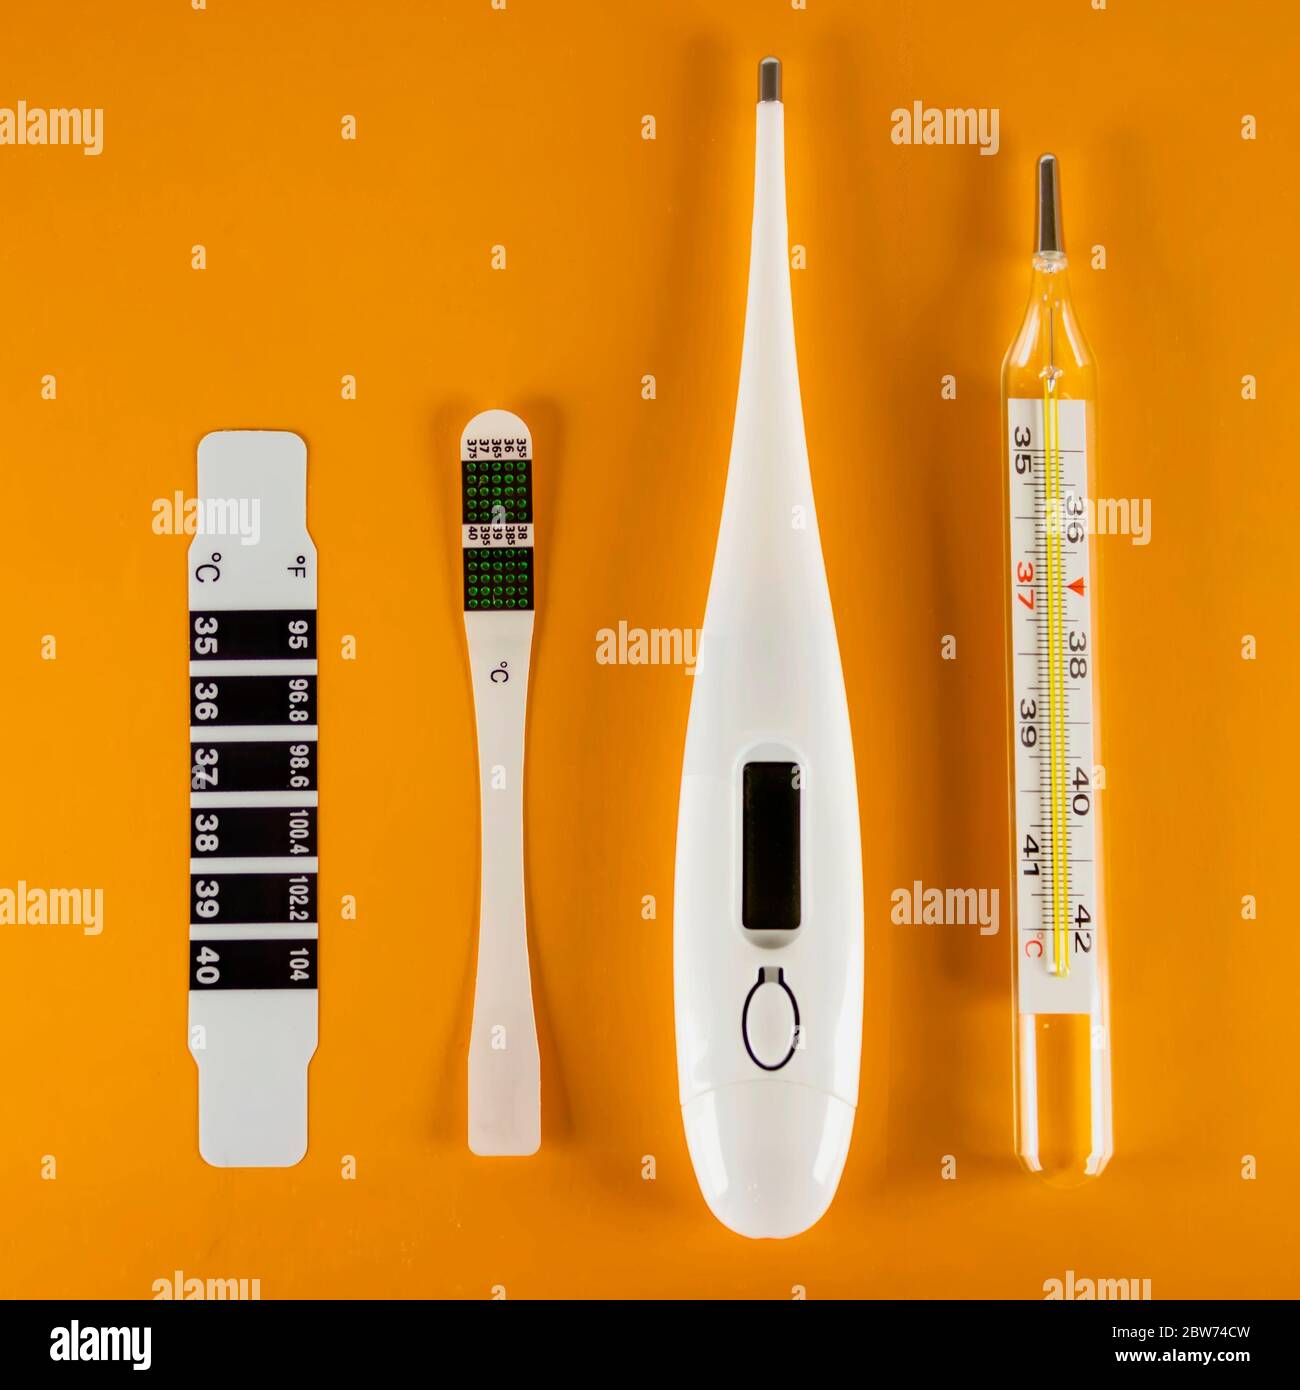 https://c8.alamy.com/comp/2BW74CW/on-a-yellow-background-there-are-four-types-of-thermometers-liquid-crystal-clinical-electric-and-mercury-concept-of-health-care-and-medicine-2BW74CW.jpg